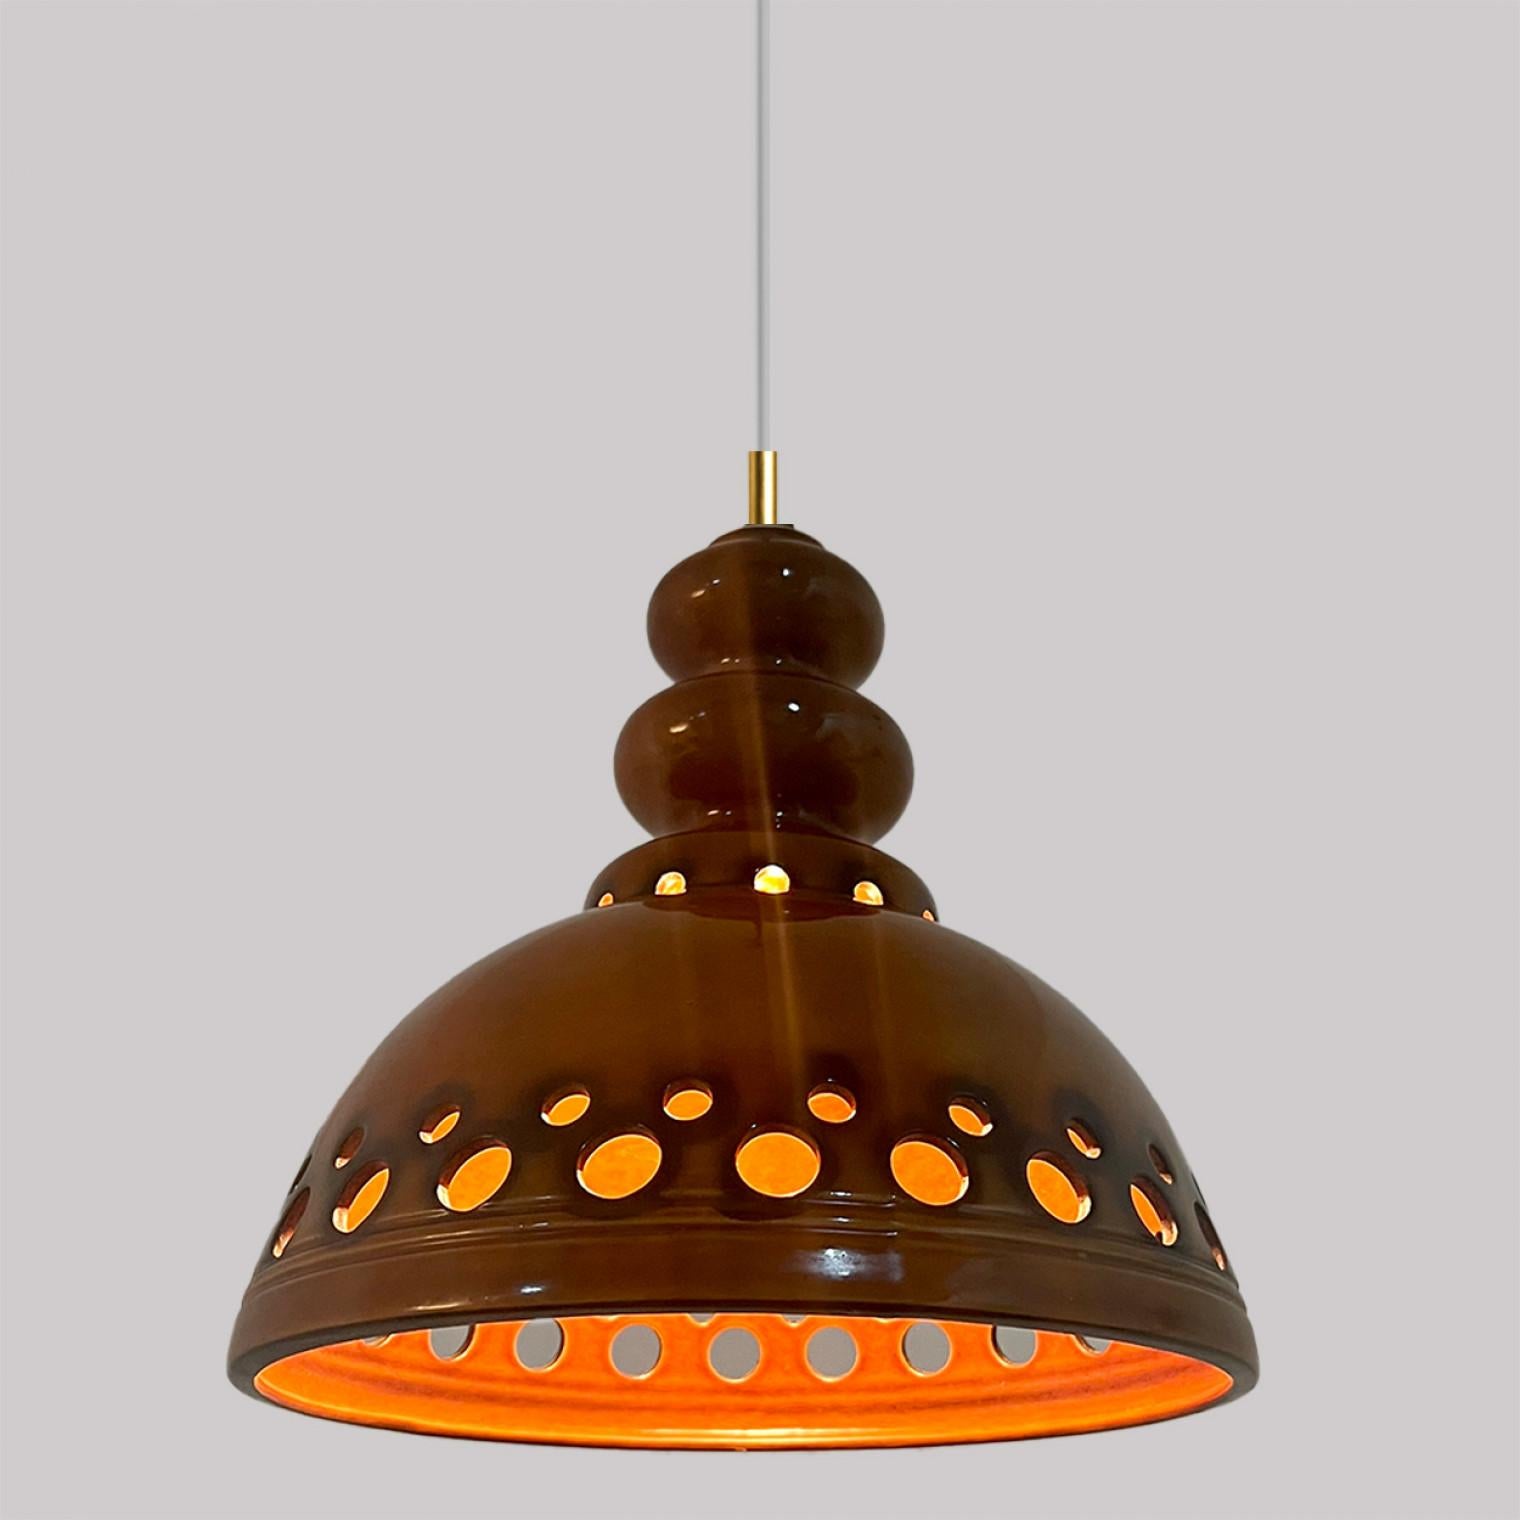 Set of Mixed Brown Glazed Ceramic Pendant Lights, Germany, 1970s For Sale 7